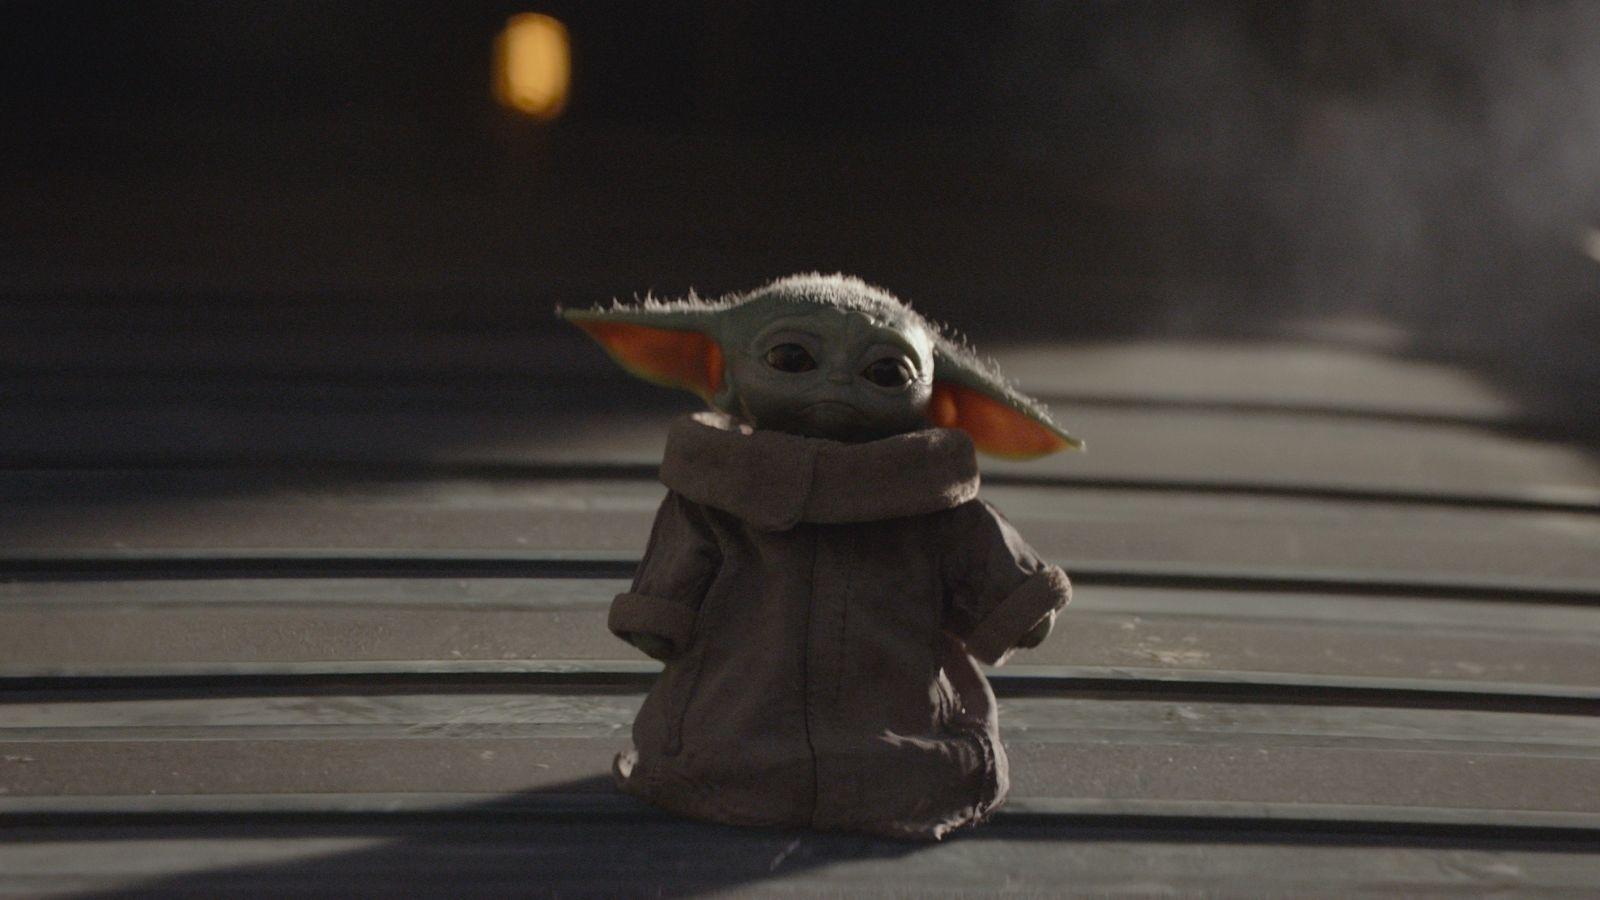 Movies Baby Yoda And The Mandalorion on Flipboard